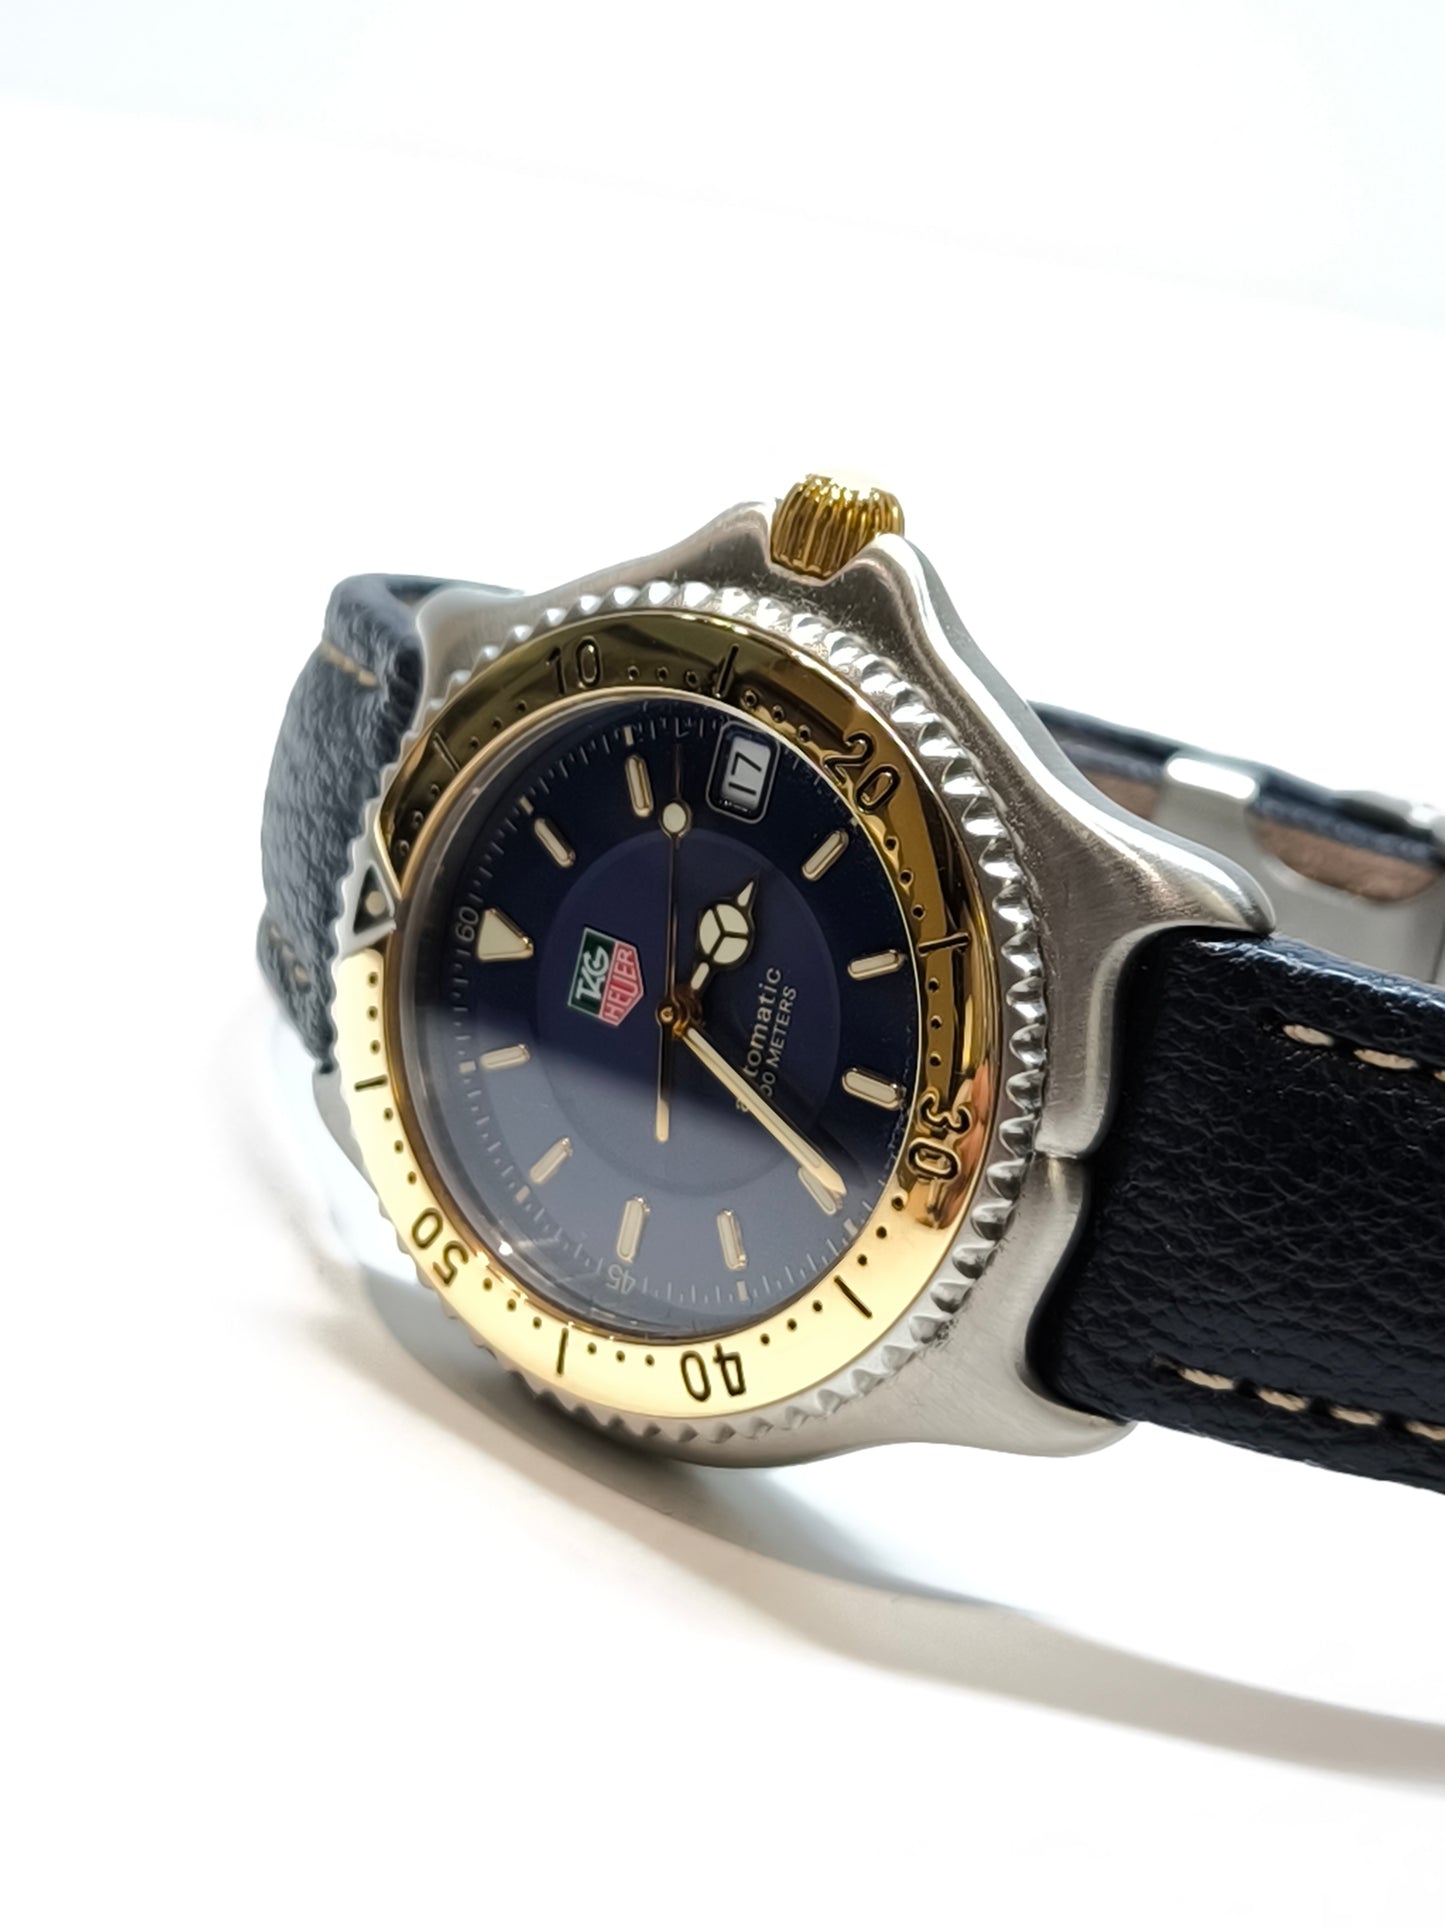 Tag-Heuer - S\EL steel and gold automatic